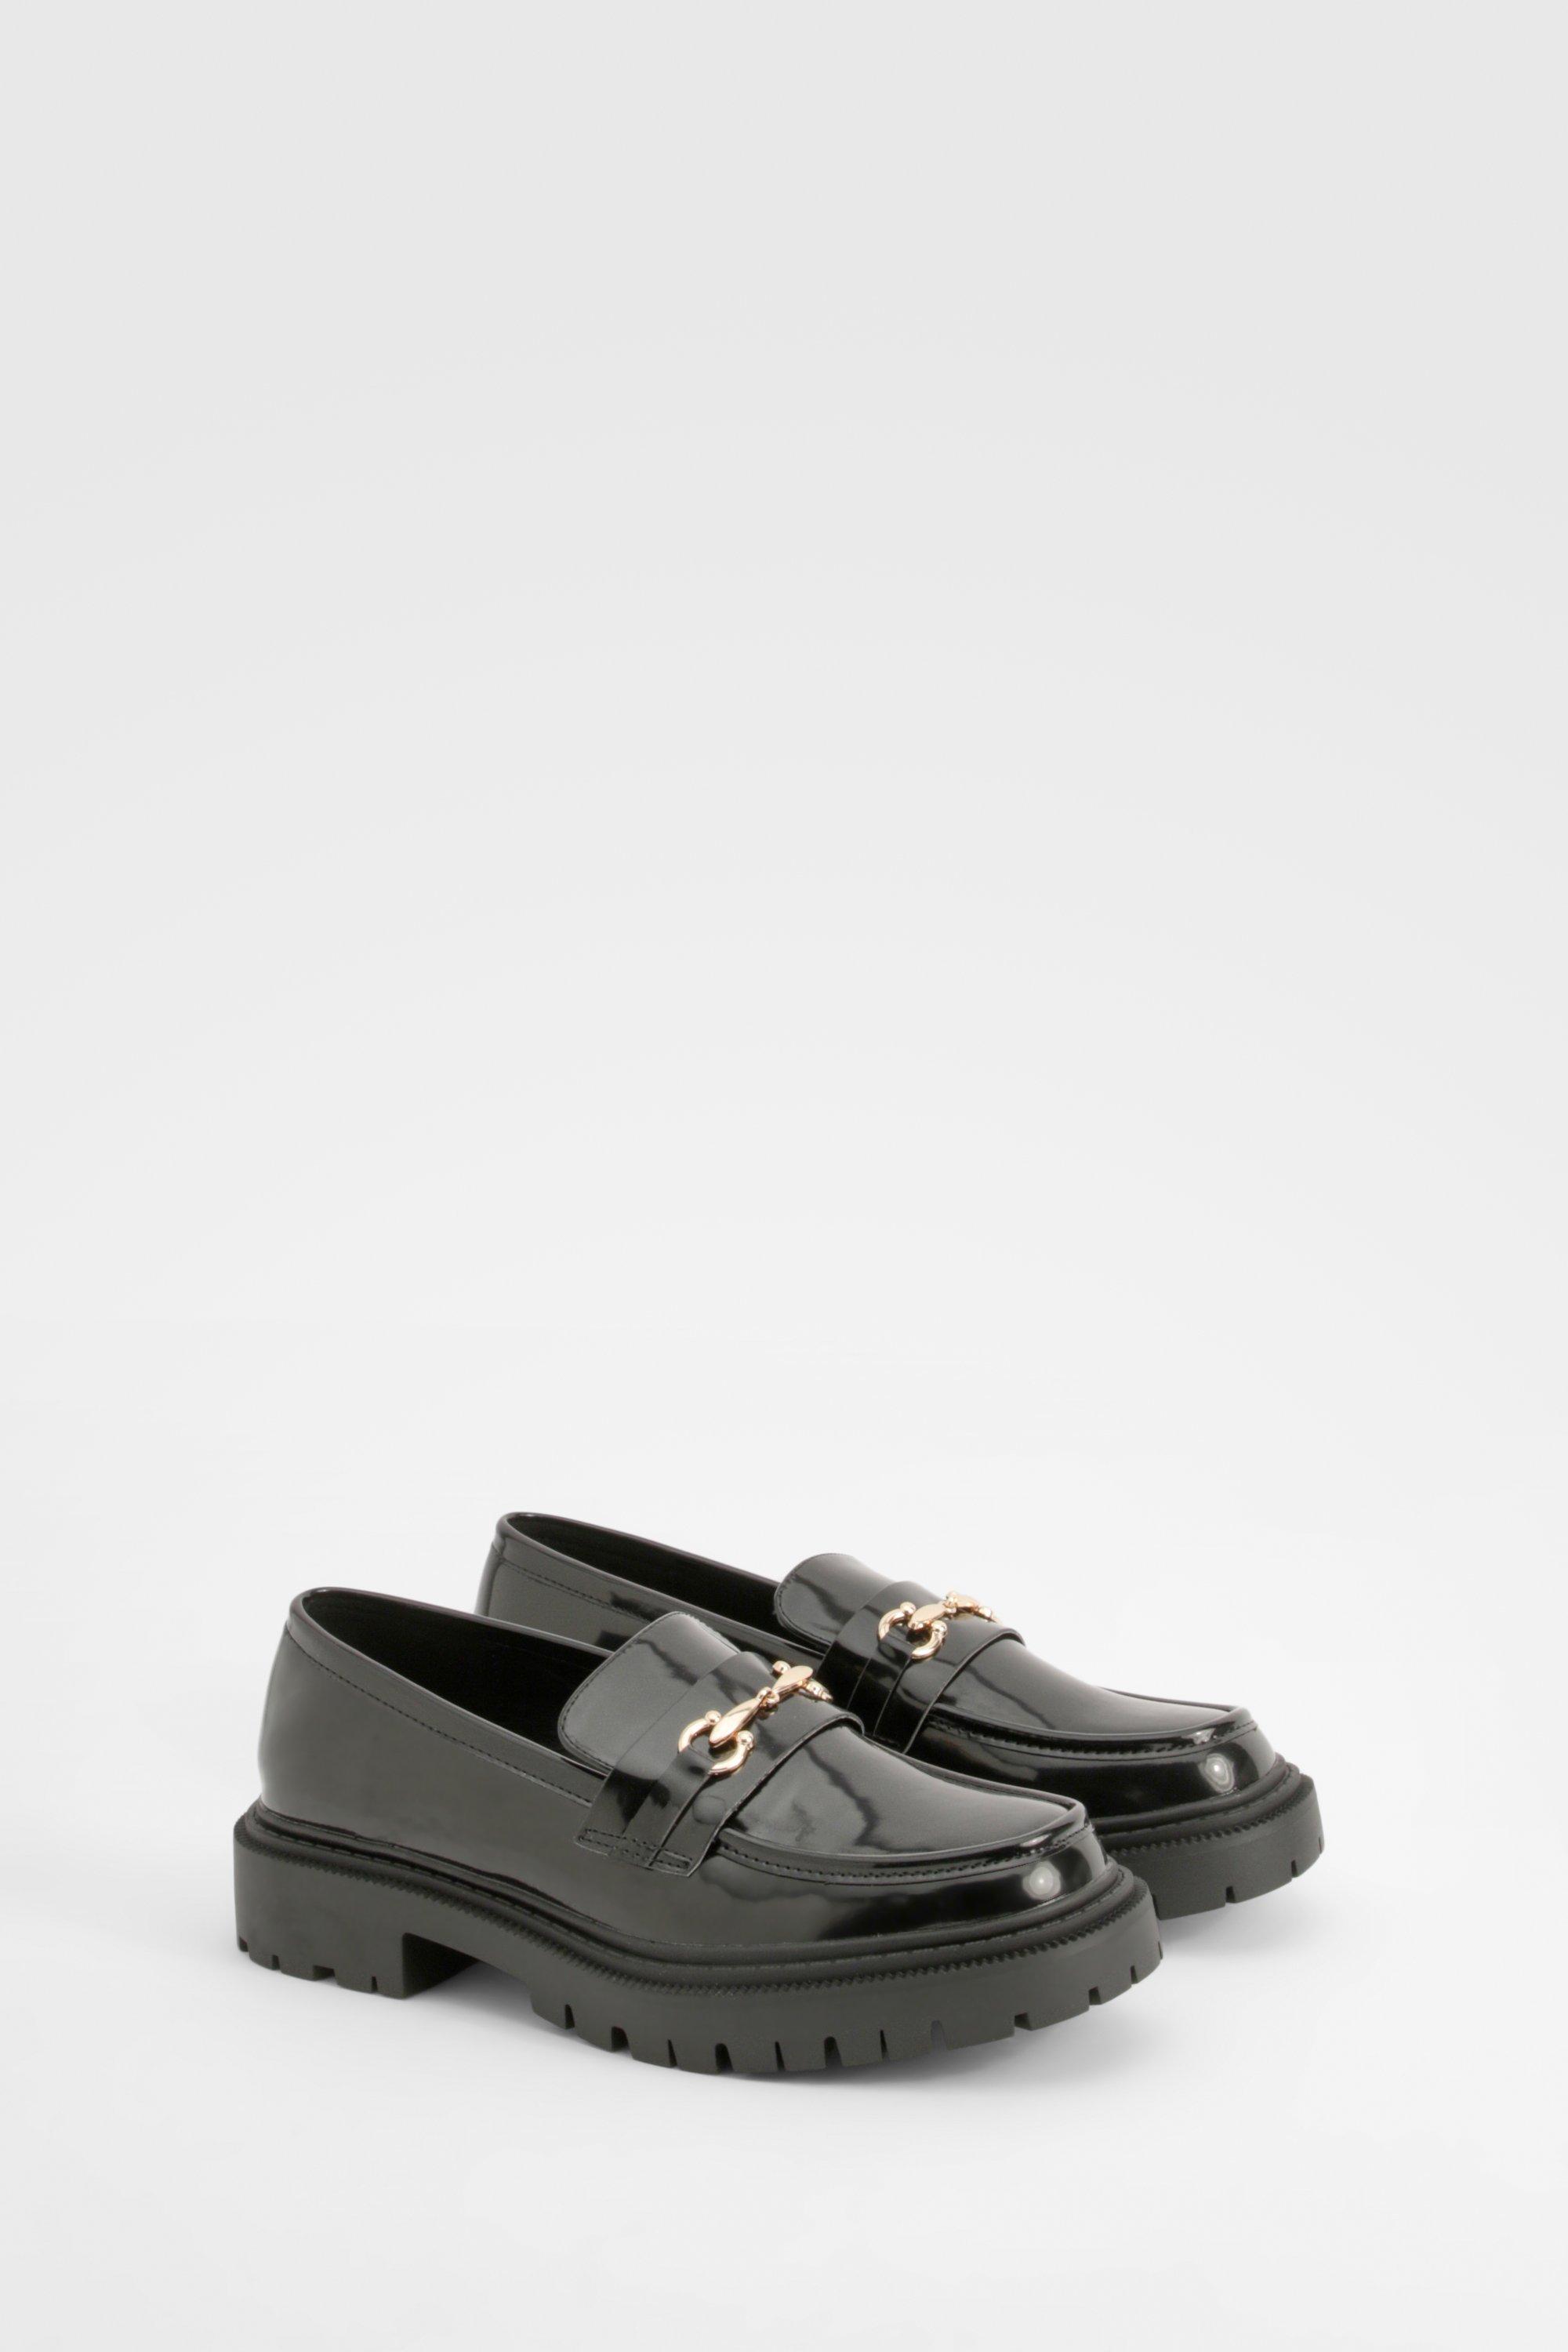 Boohoo T Bar Patent Chunky Loafers, Black